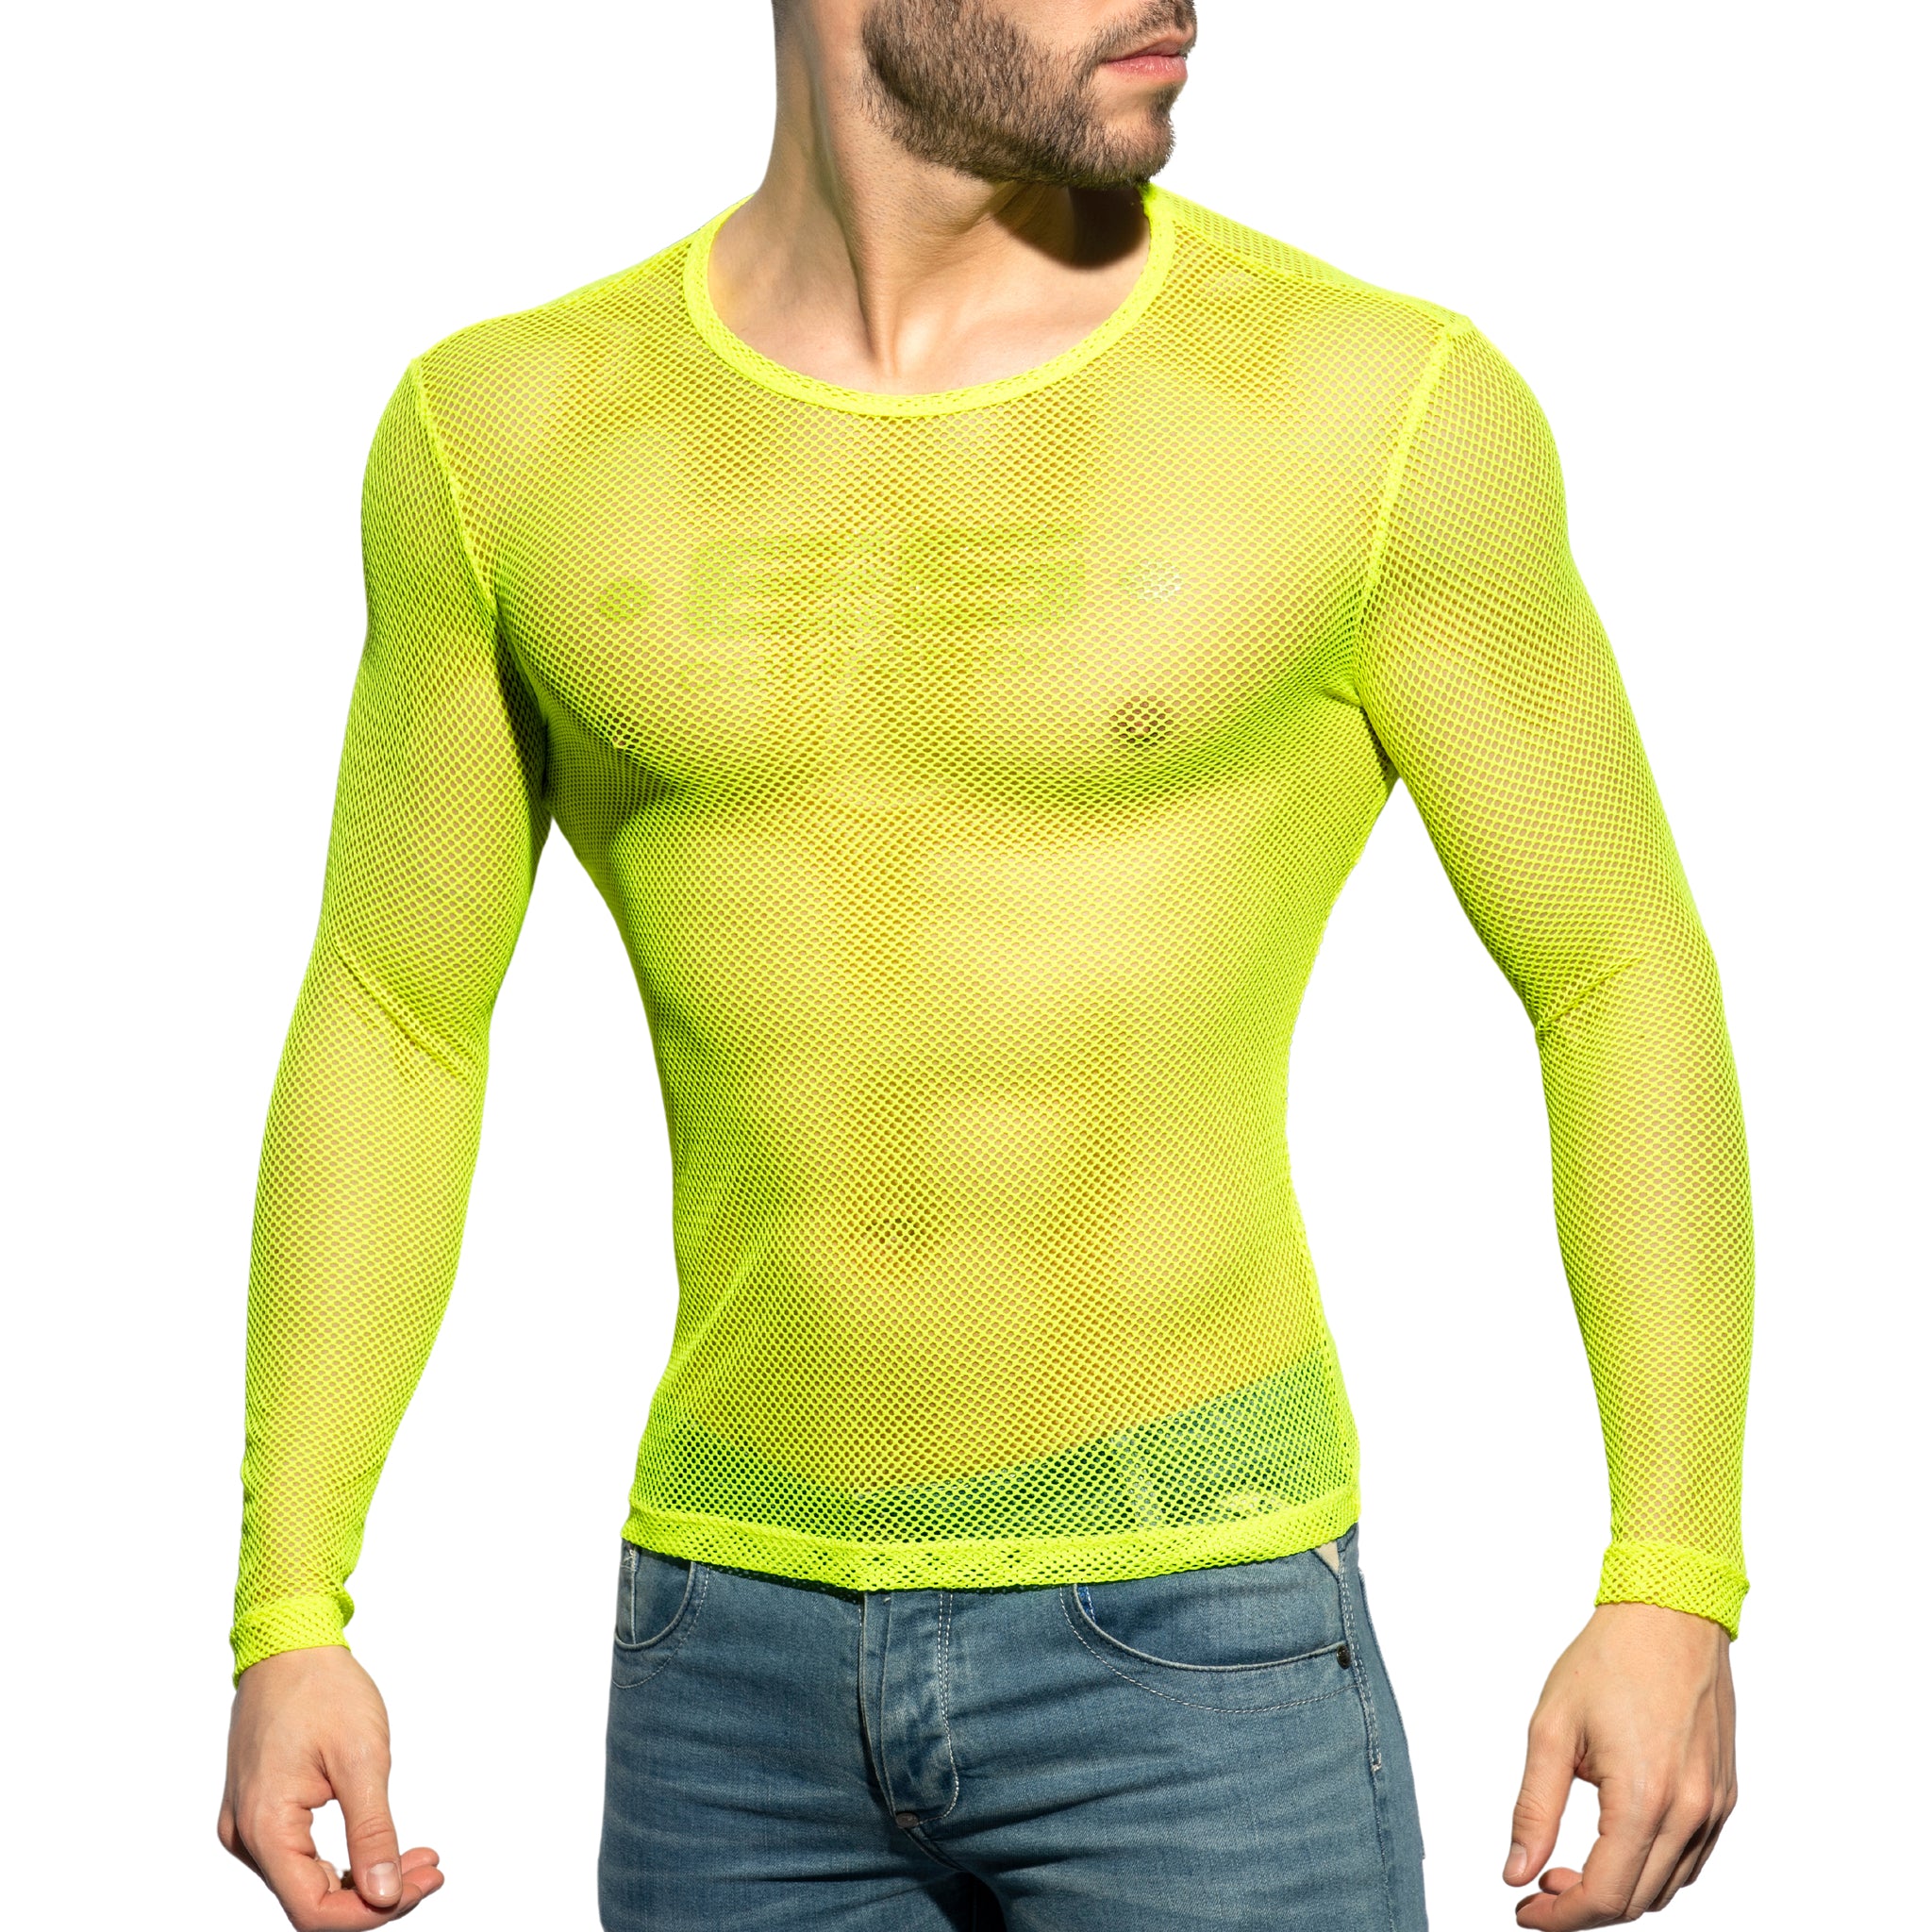 ES Collection Mesh-Long Sleeves T-Shirt Neon Yellow TS304